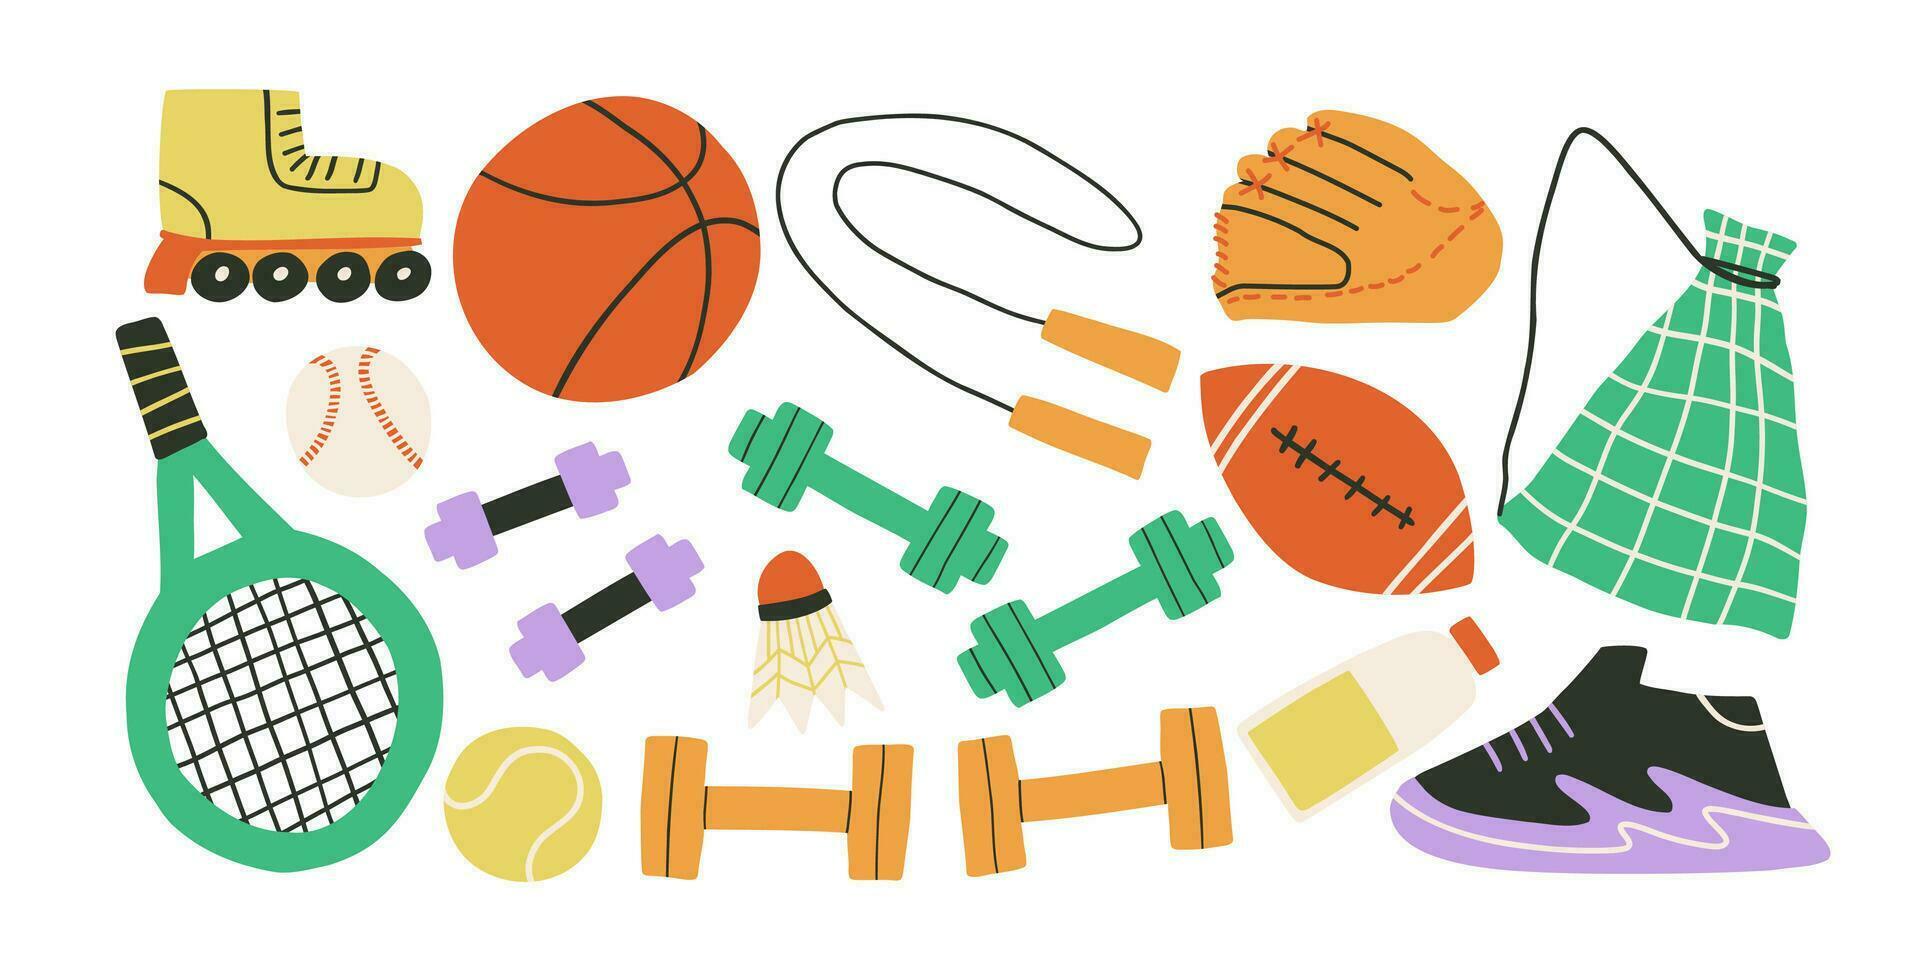 A set with sports equipment for exercises. Cross trainers, dumbbells, skipping rope, tennis racket, football, baseball, sports. Hand drawn flat style illustration. vector